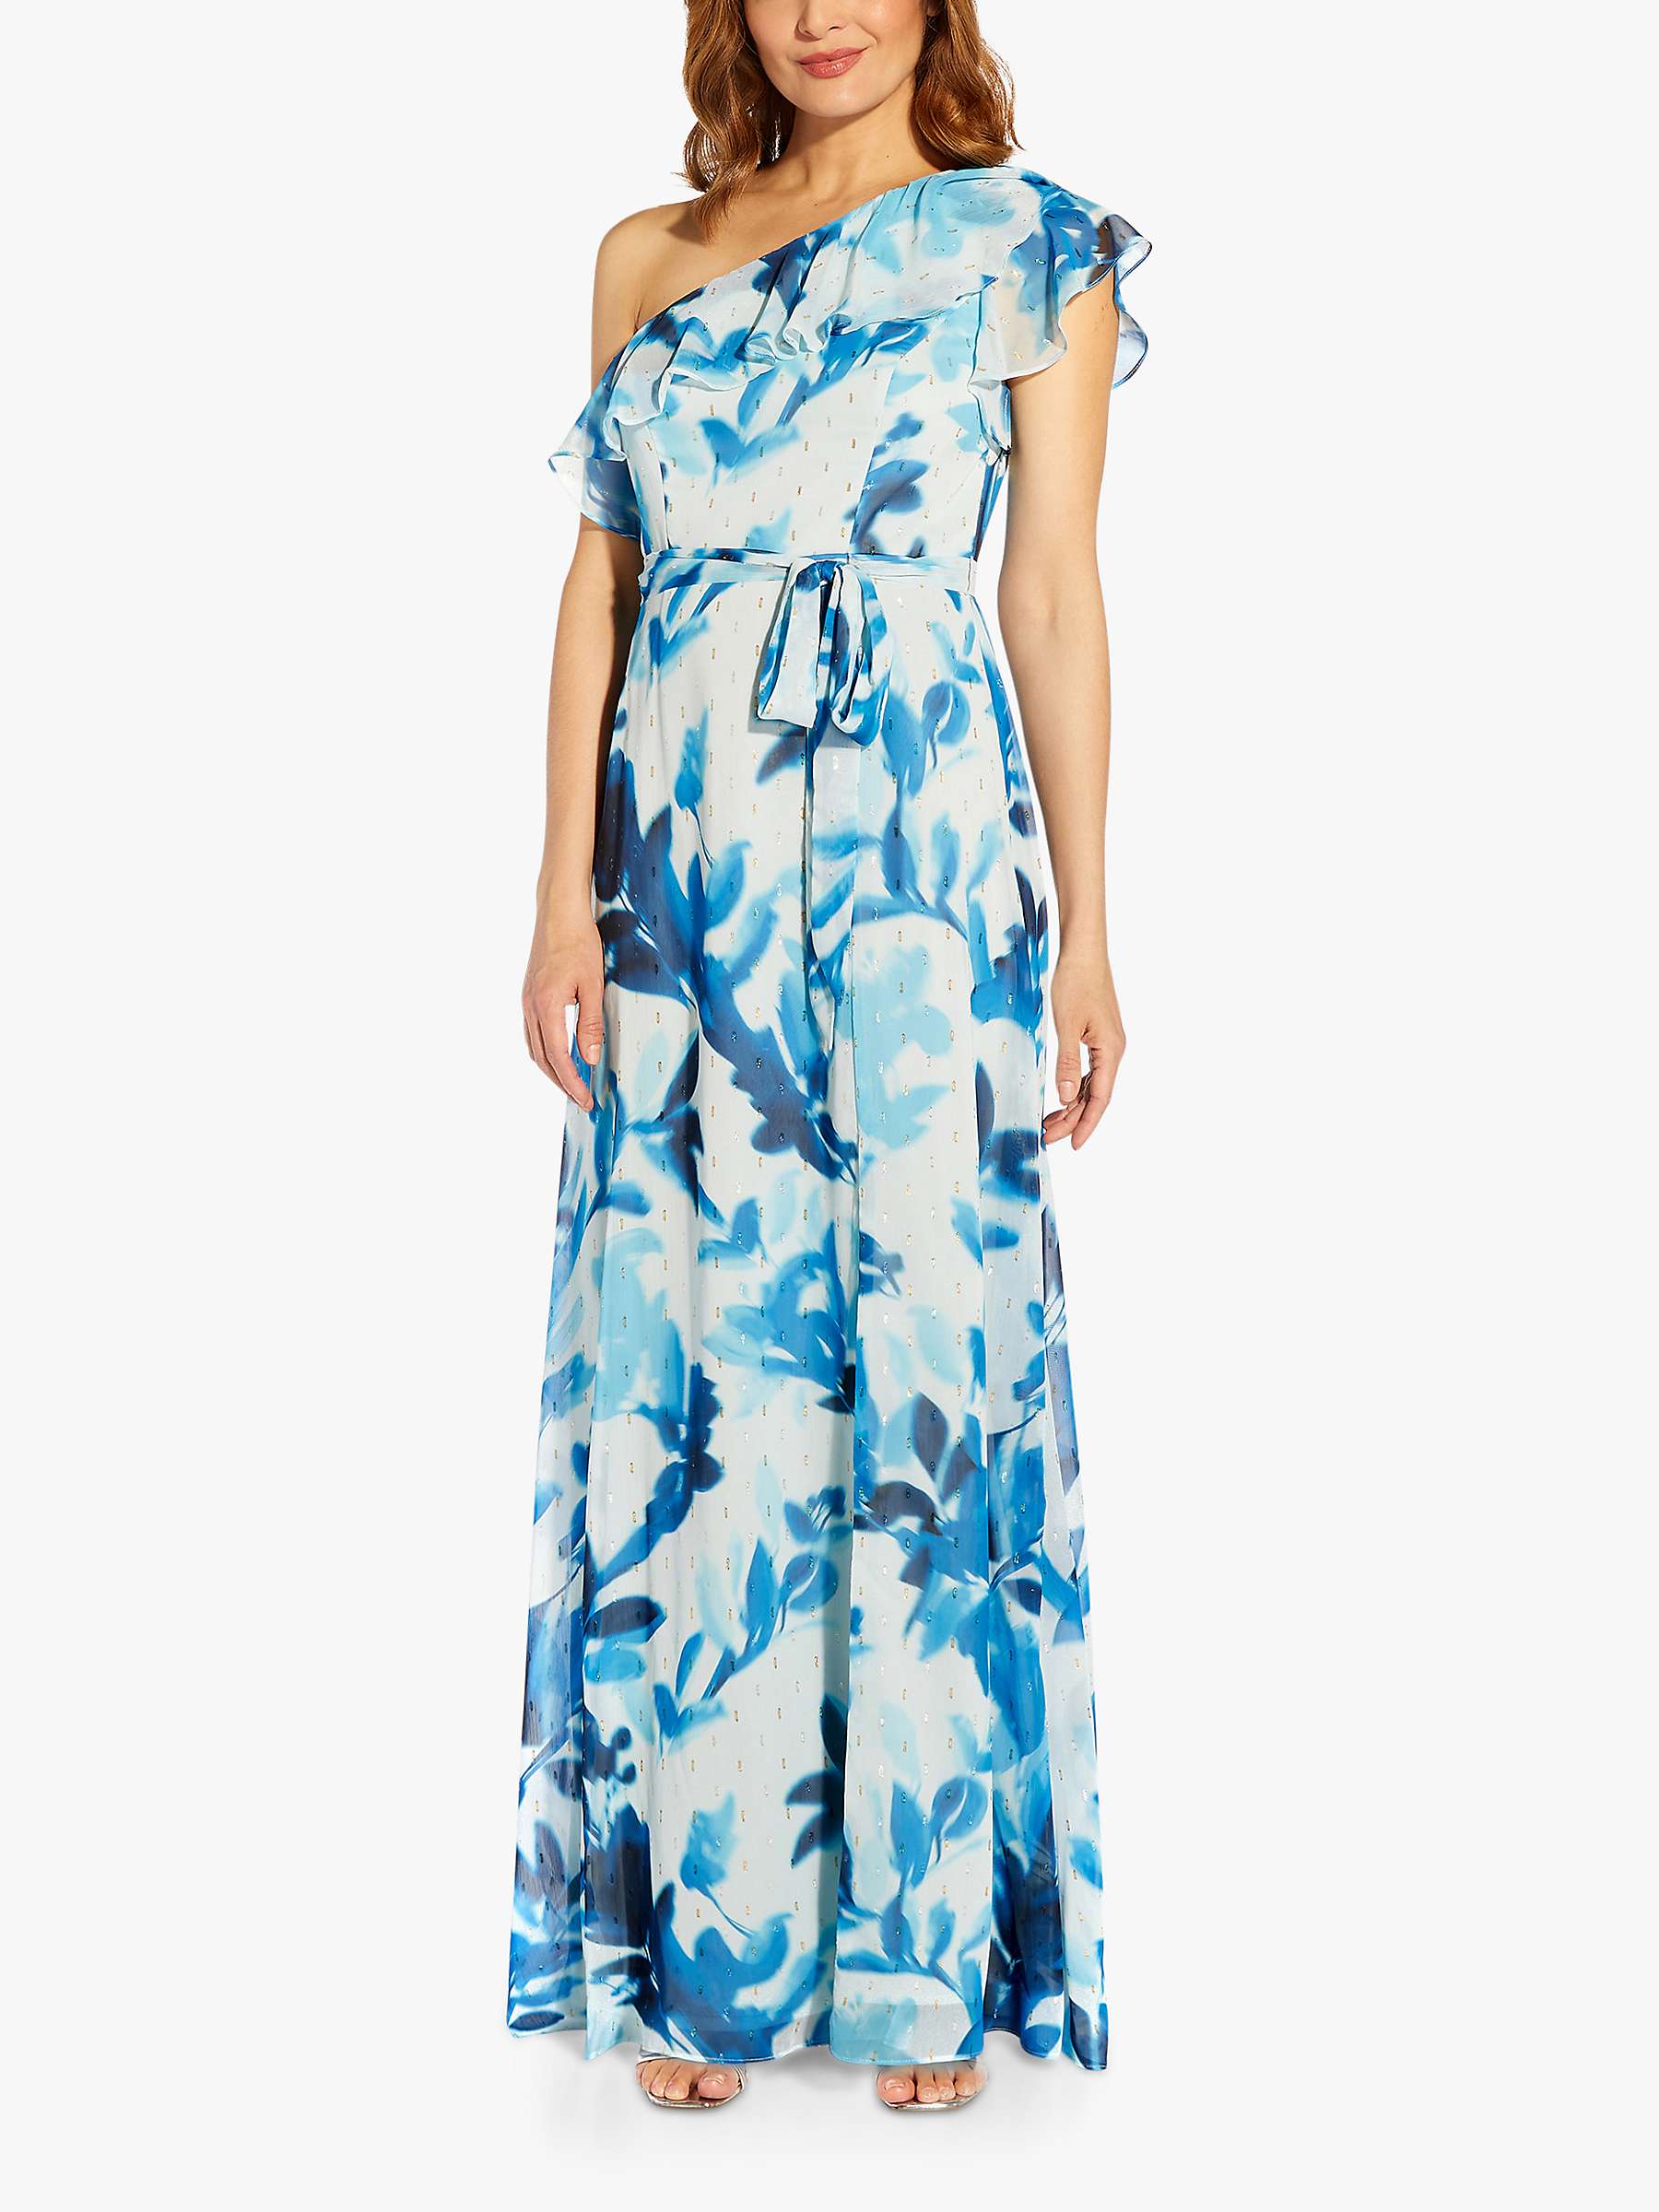 Buy Adrianna Papell Floral Metallic Maxi Dress, Blue/Multi Online at johnlewis.com